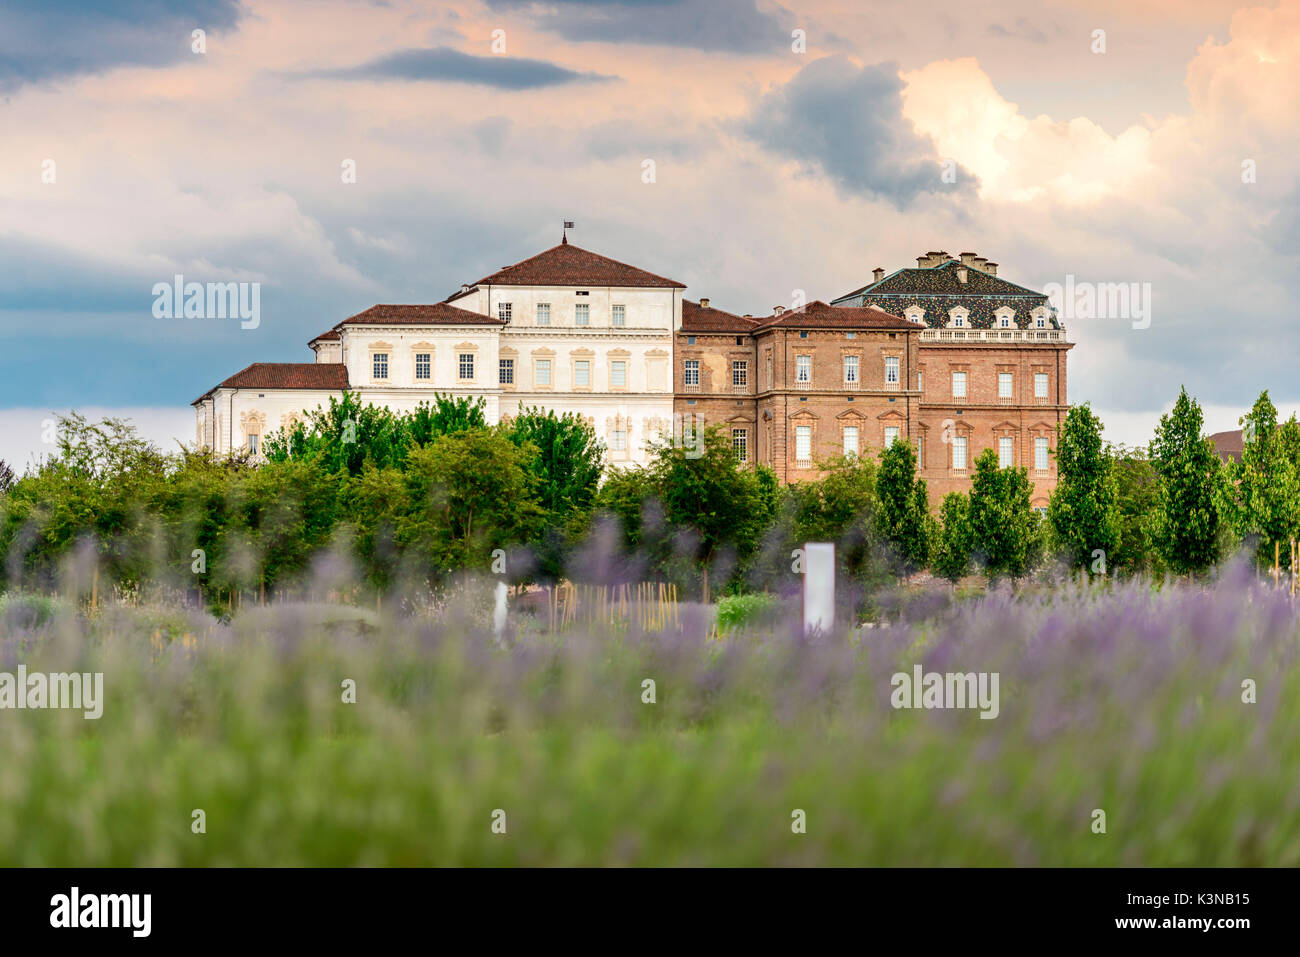 Palace of Venaria, Residences of the Royal House of Savoy. Europe. Italy. Piedmont. Torino district. Venaria Reale Stock Photo